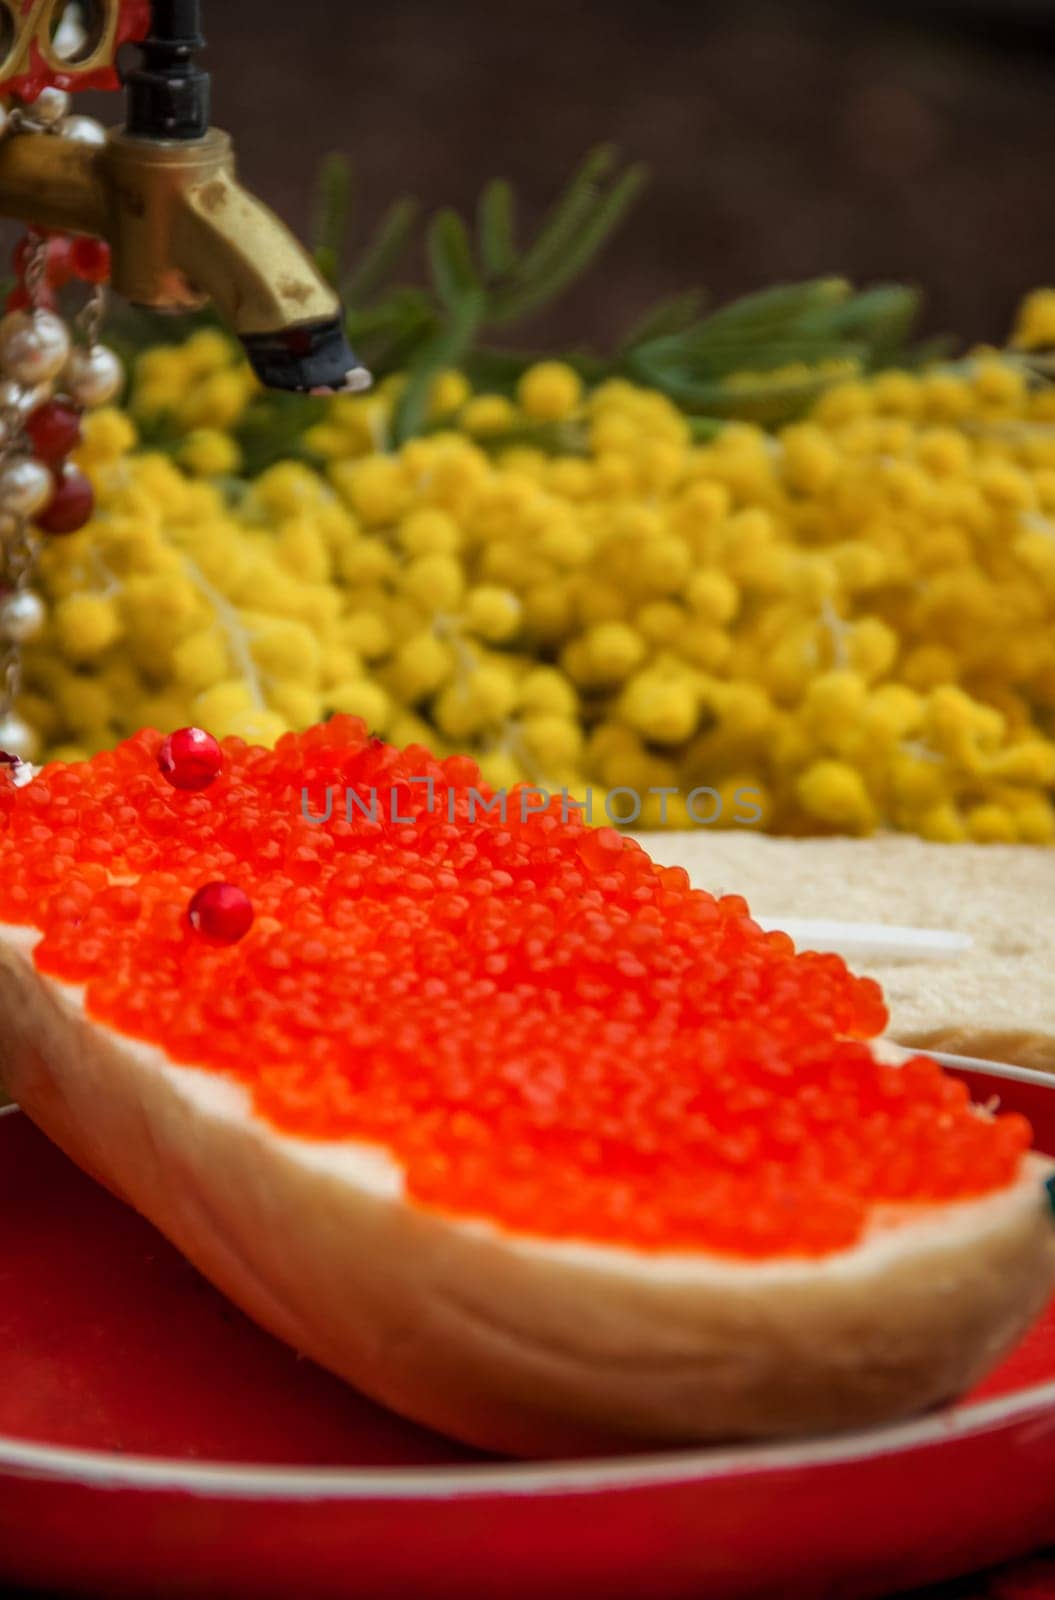 Red caviar is spread on bread with a thick layer. Maslenitsa street fair. by Alina_Lebed